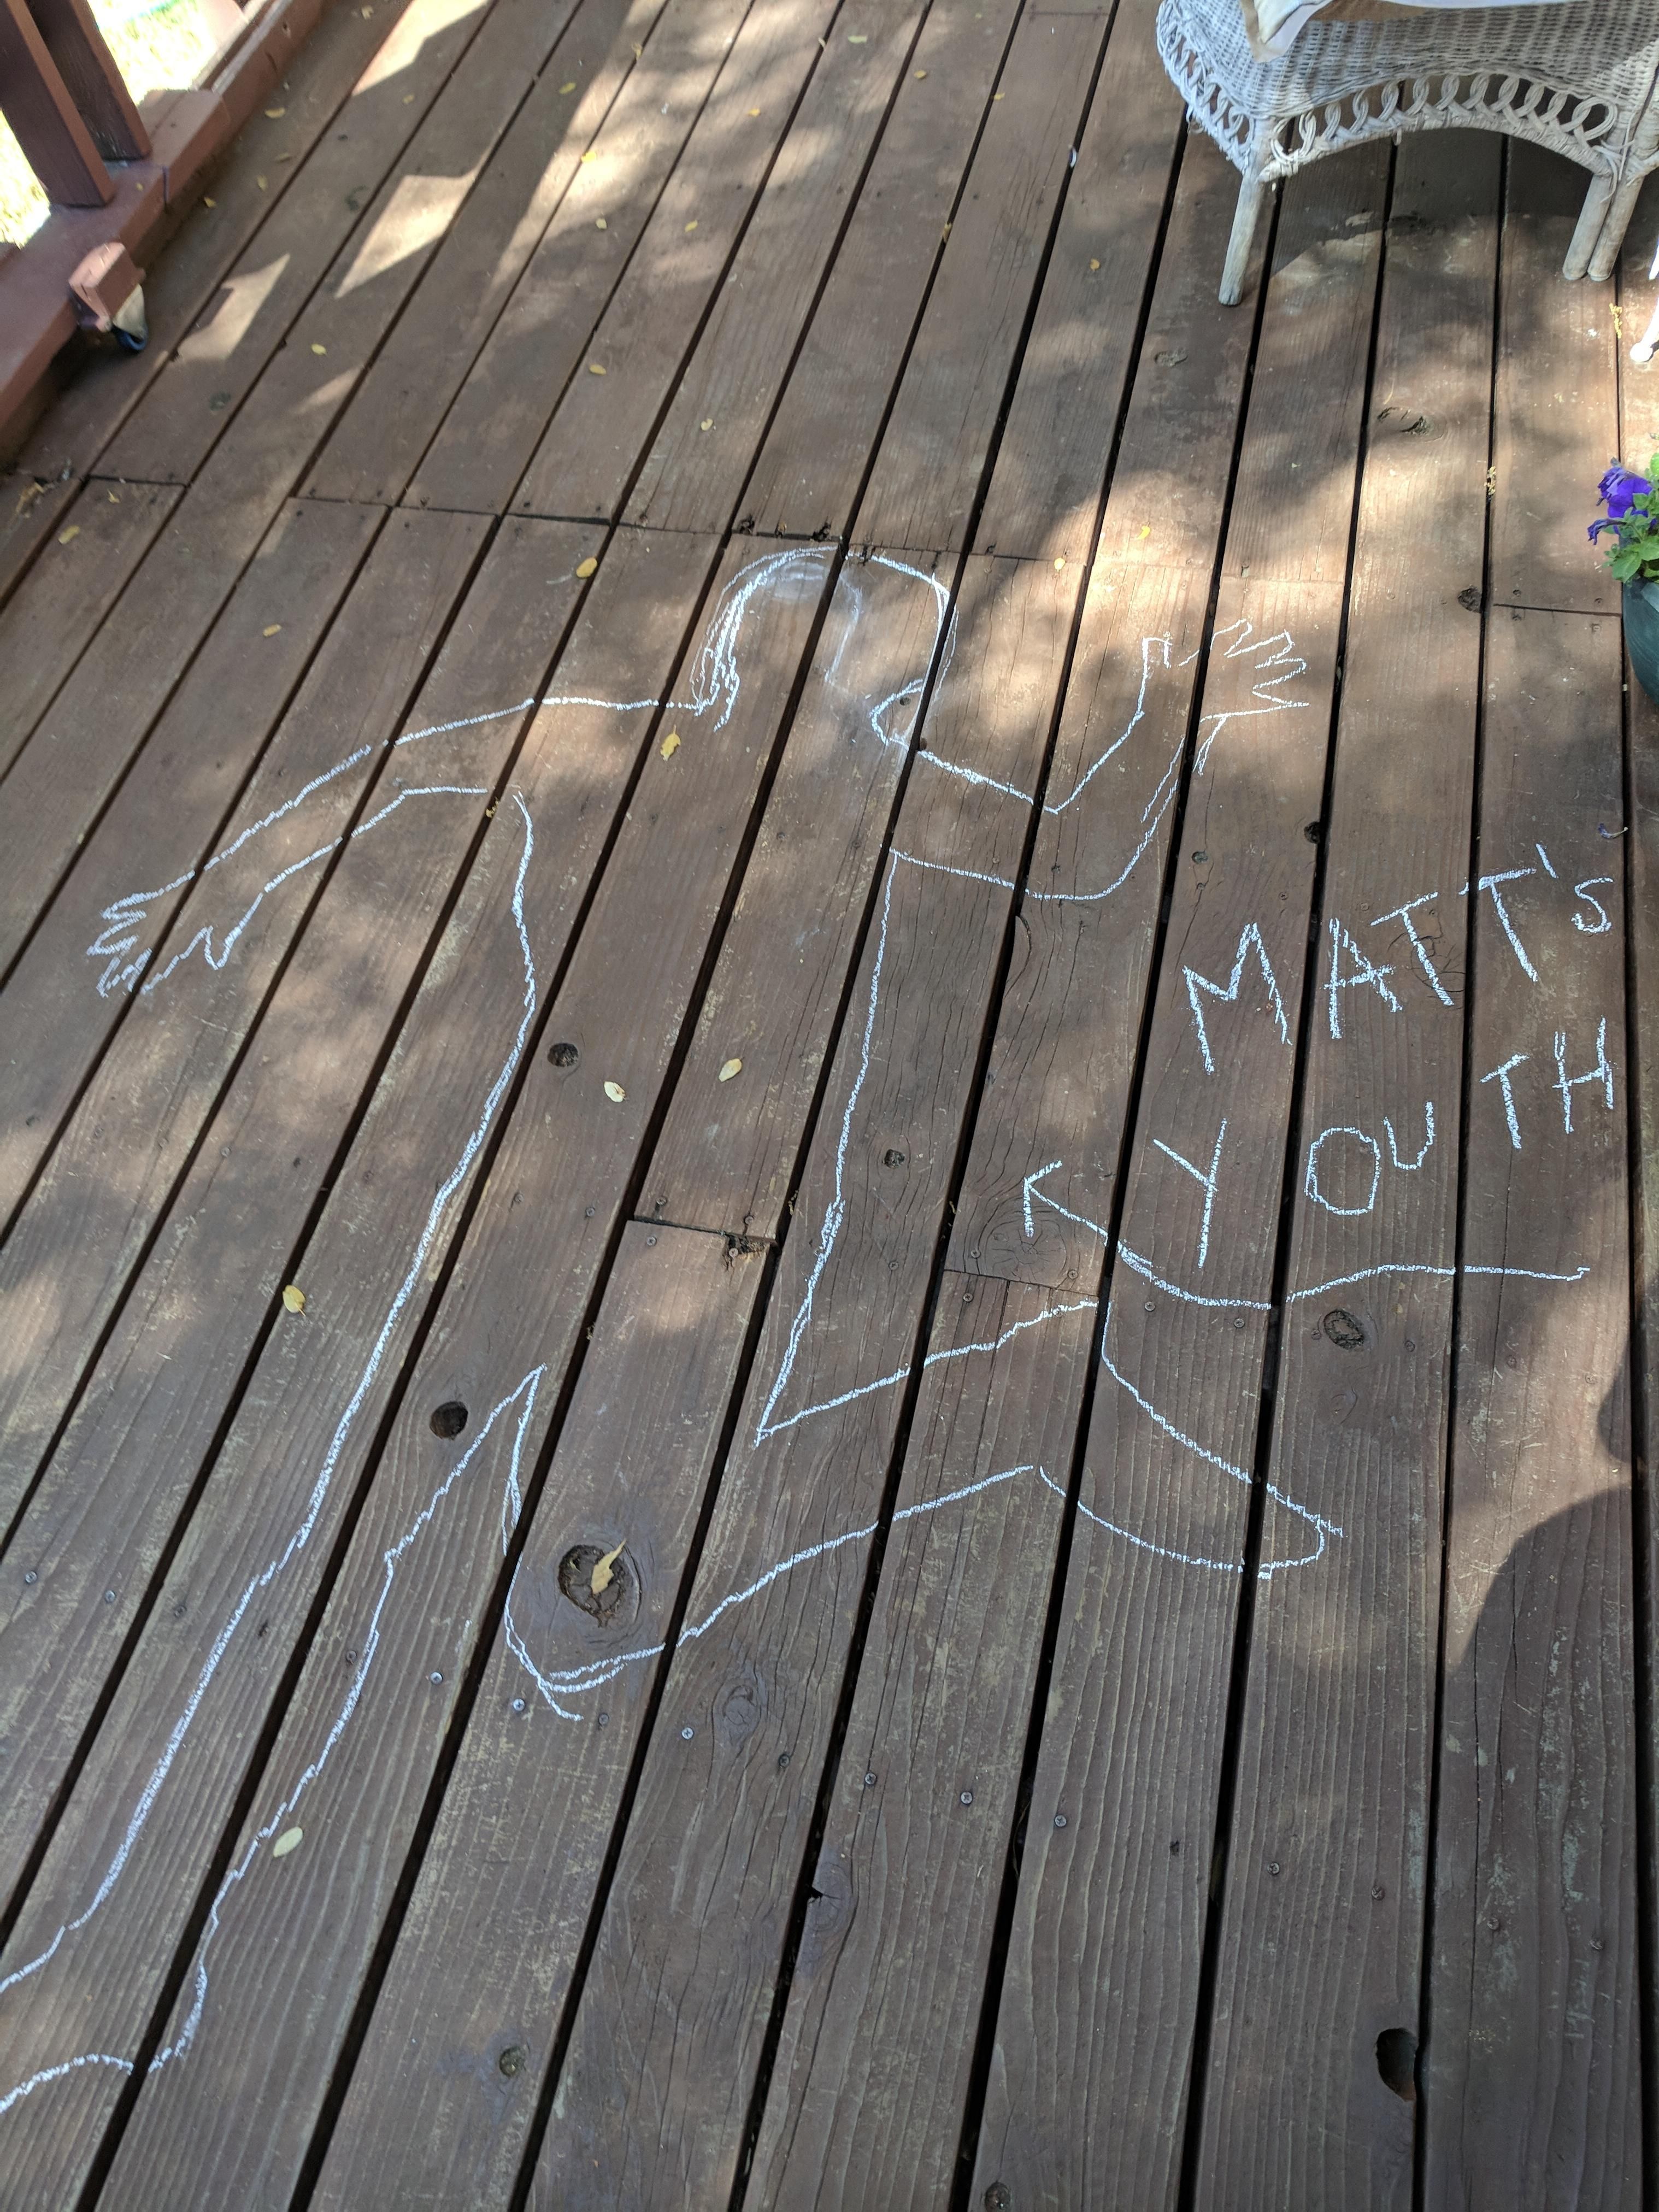 Turned 40 today. My kids greeted me with this tradegy on my front porch......